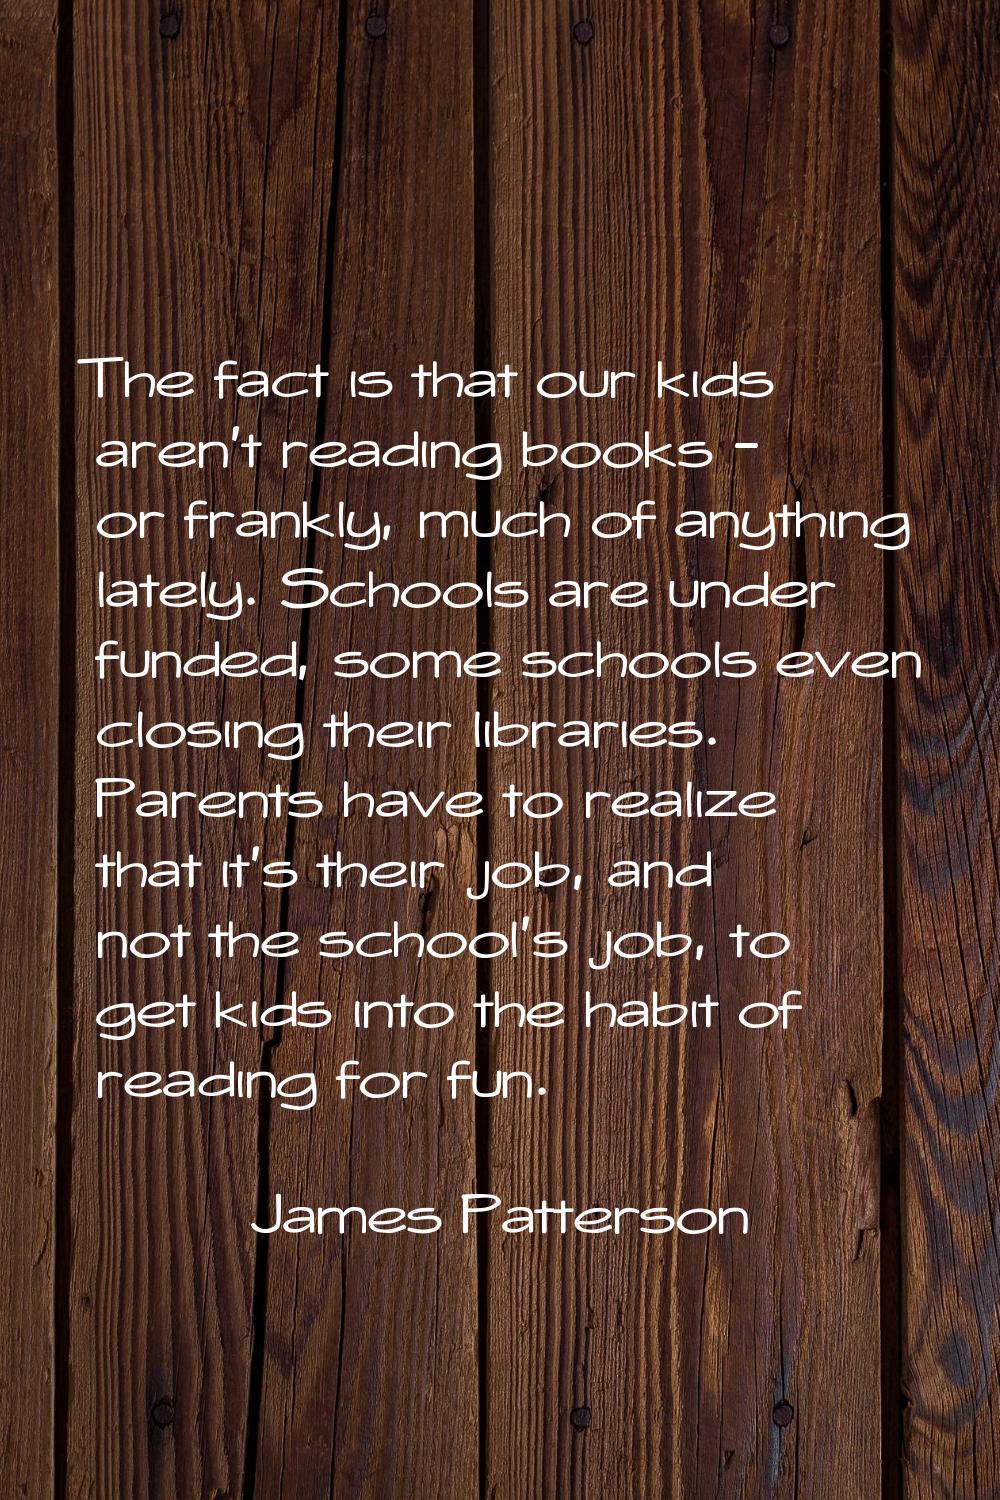 The fact is that our kids aren't reading books - or frankly, much of anything lately. Schools are u